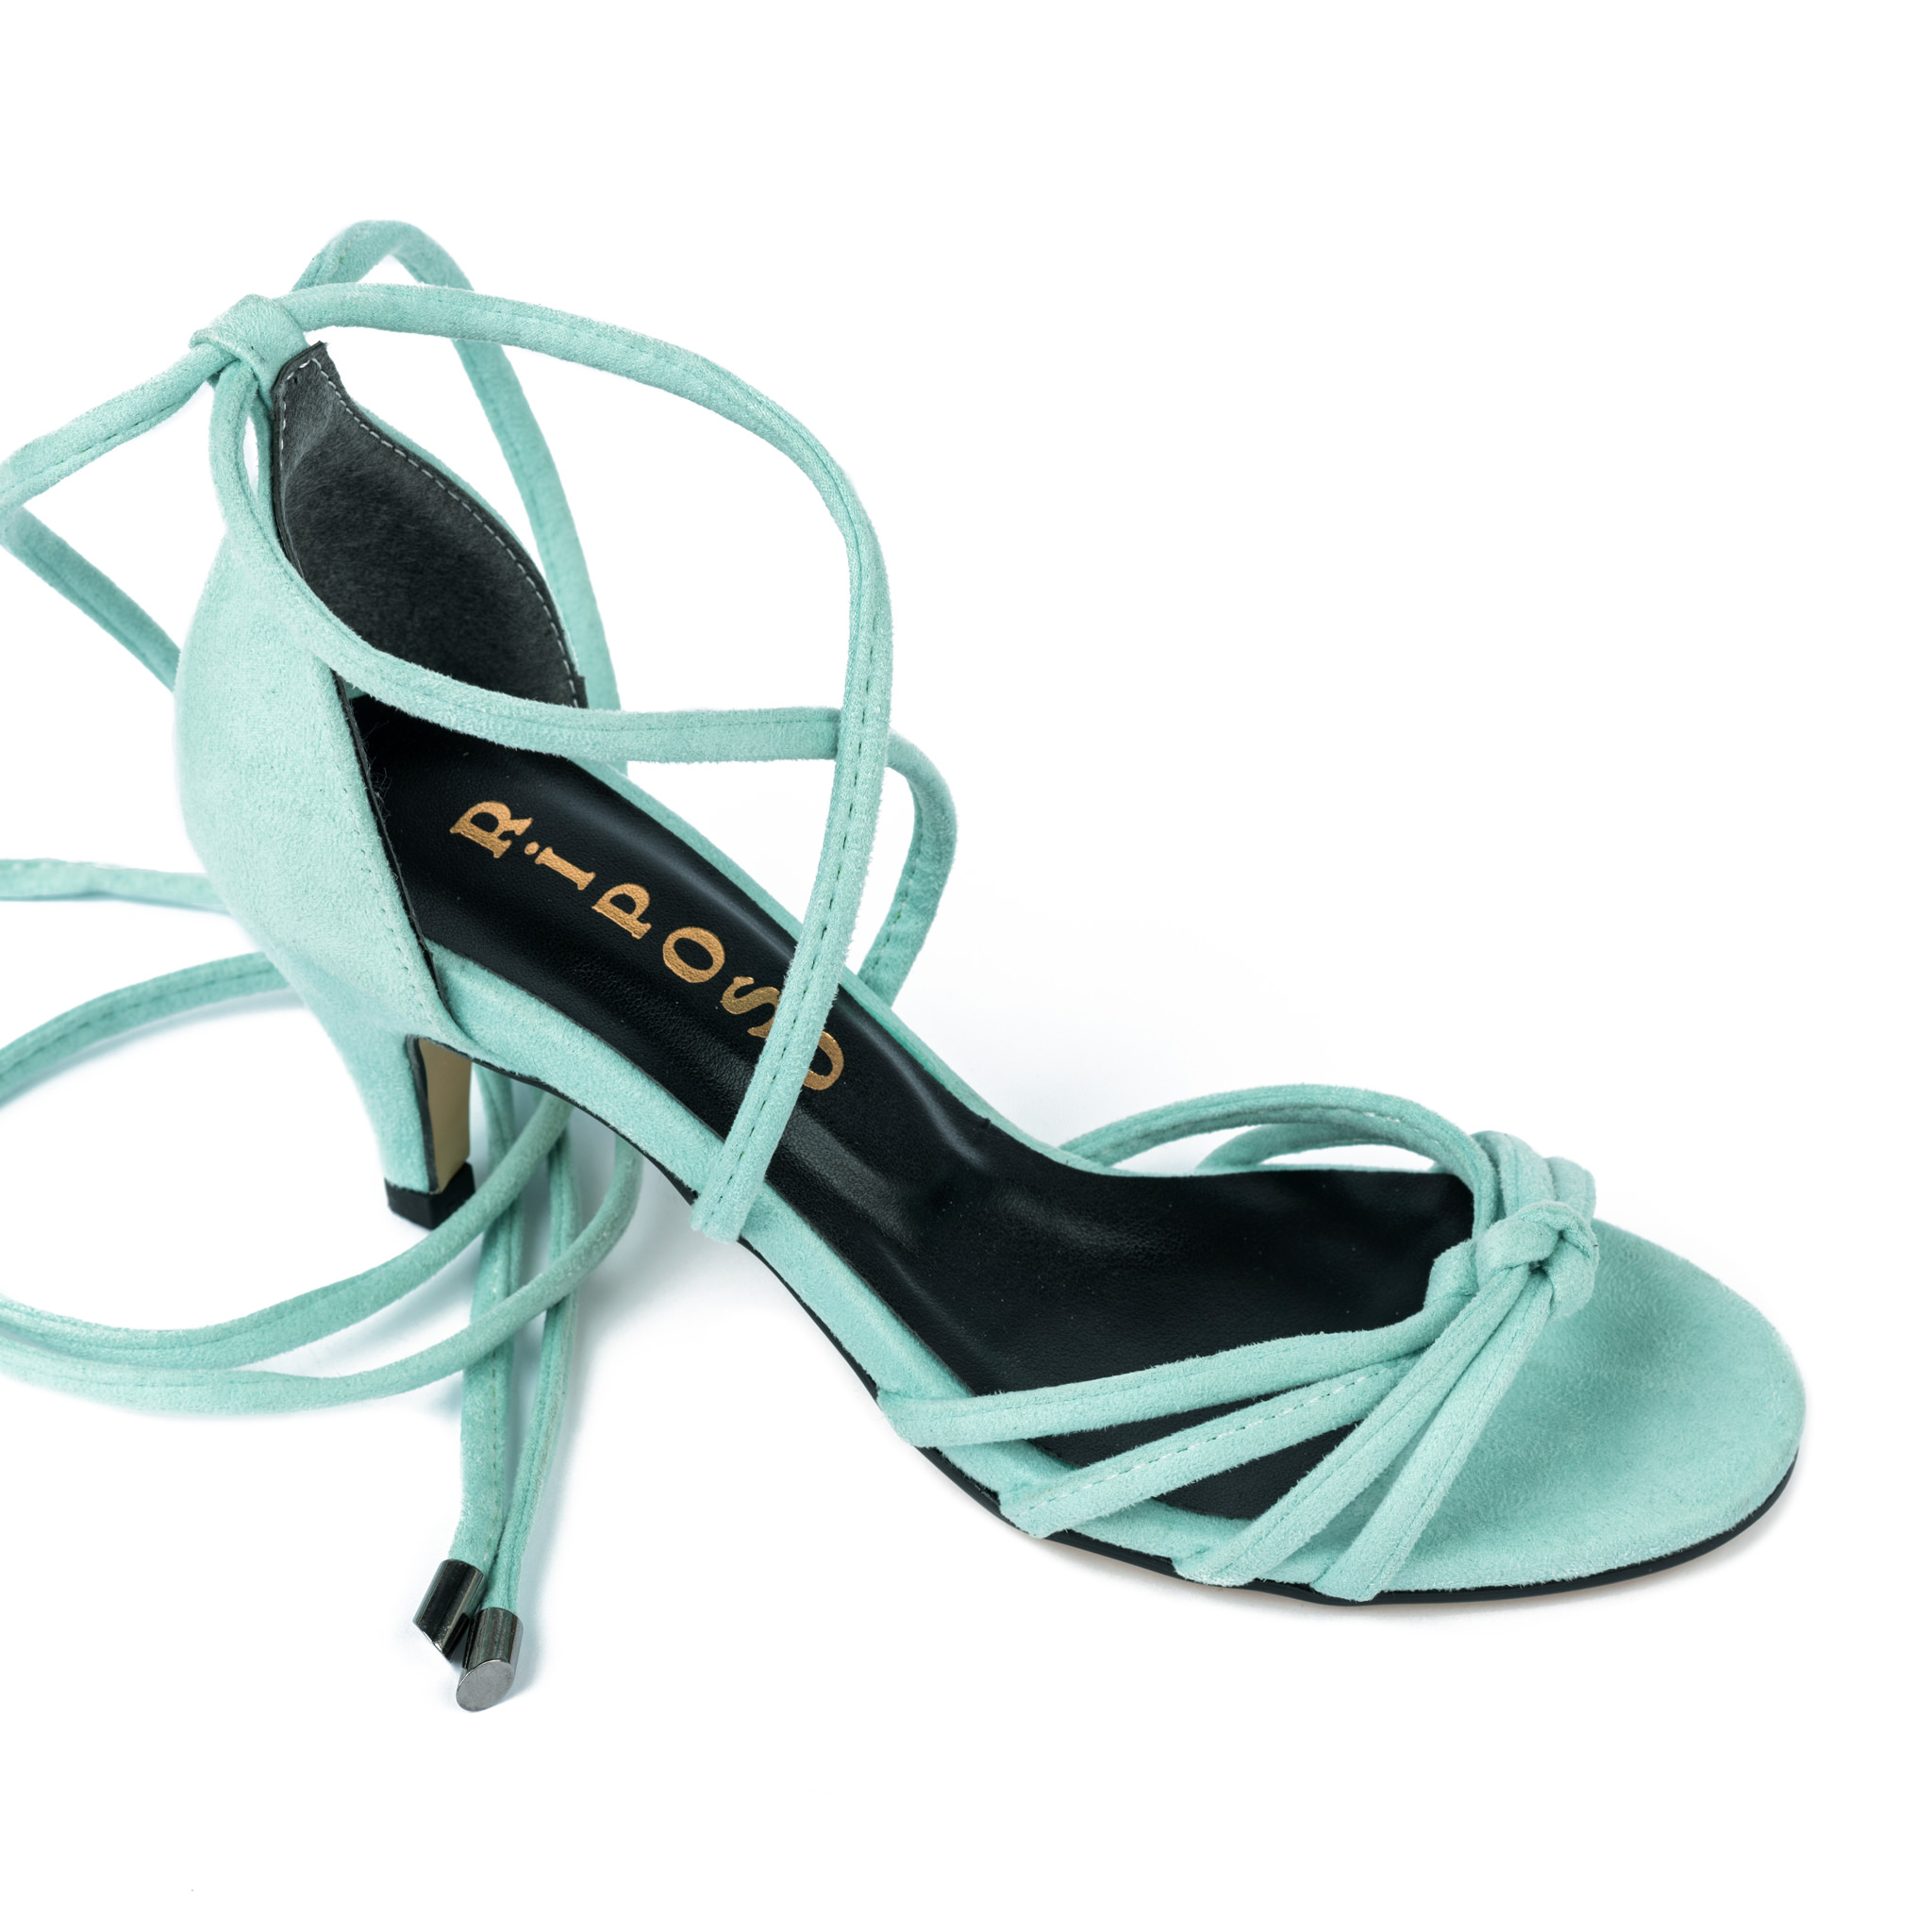 VELOUR LACE UP SANDALS WITH THIN HEEL - MINT